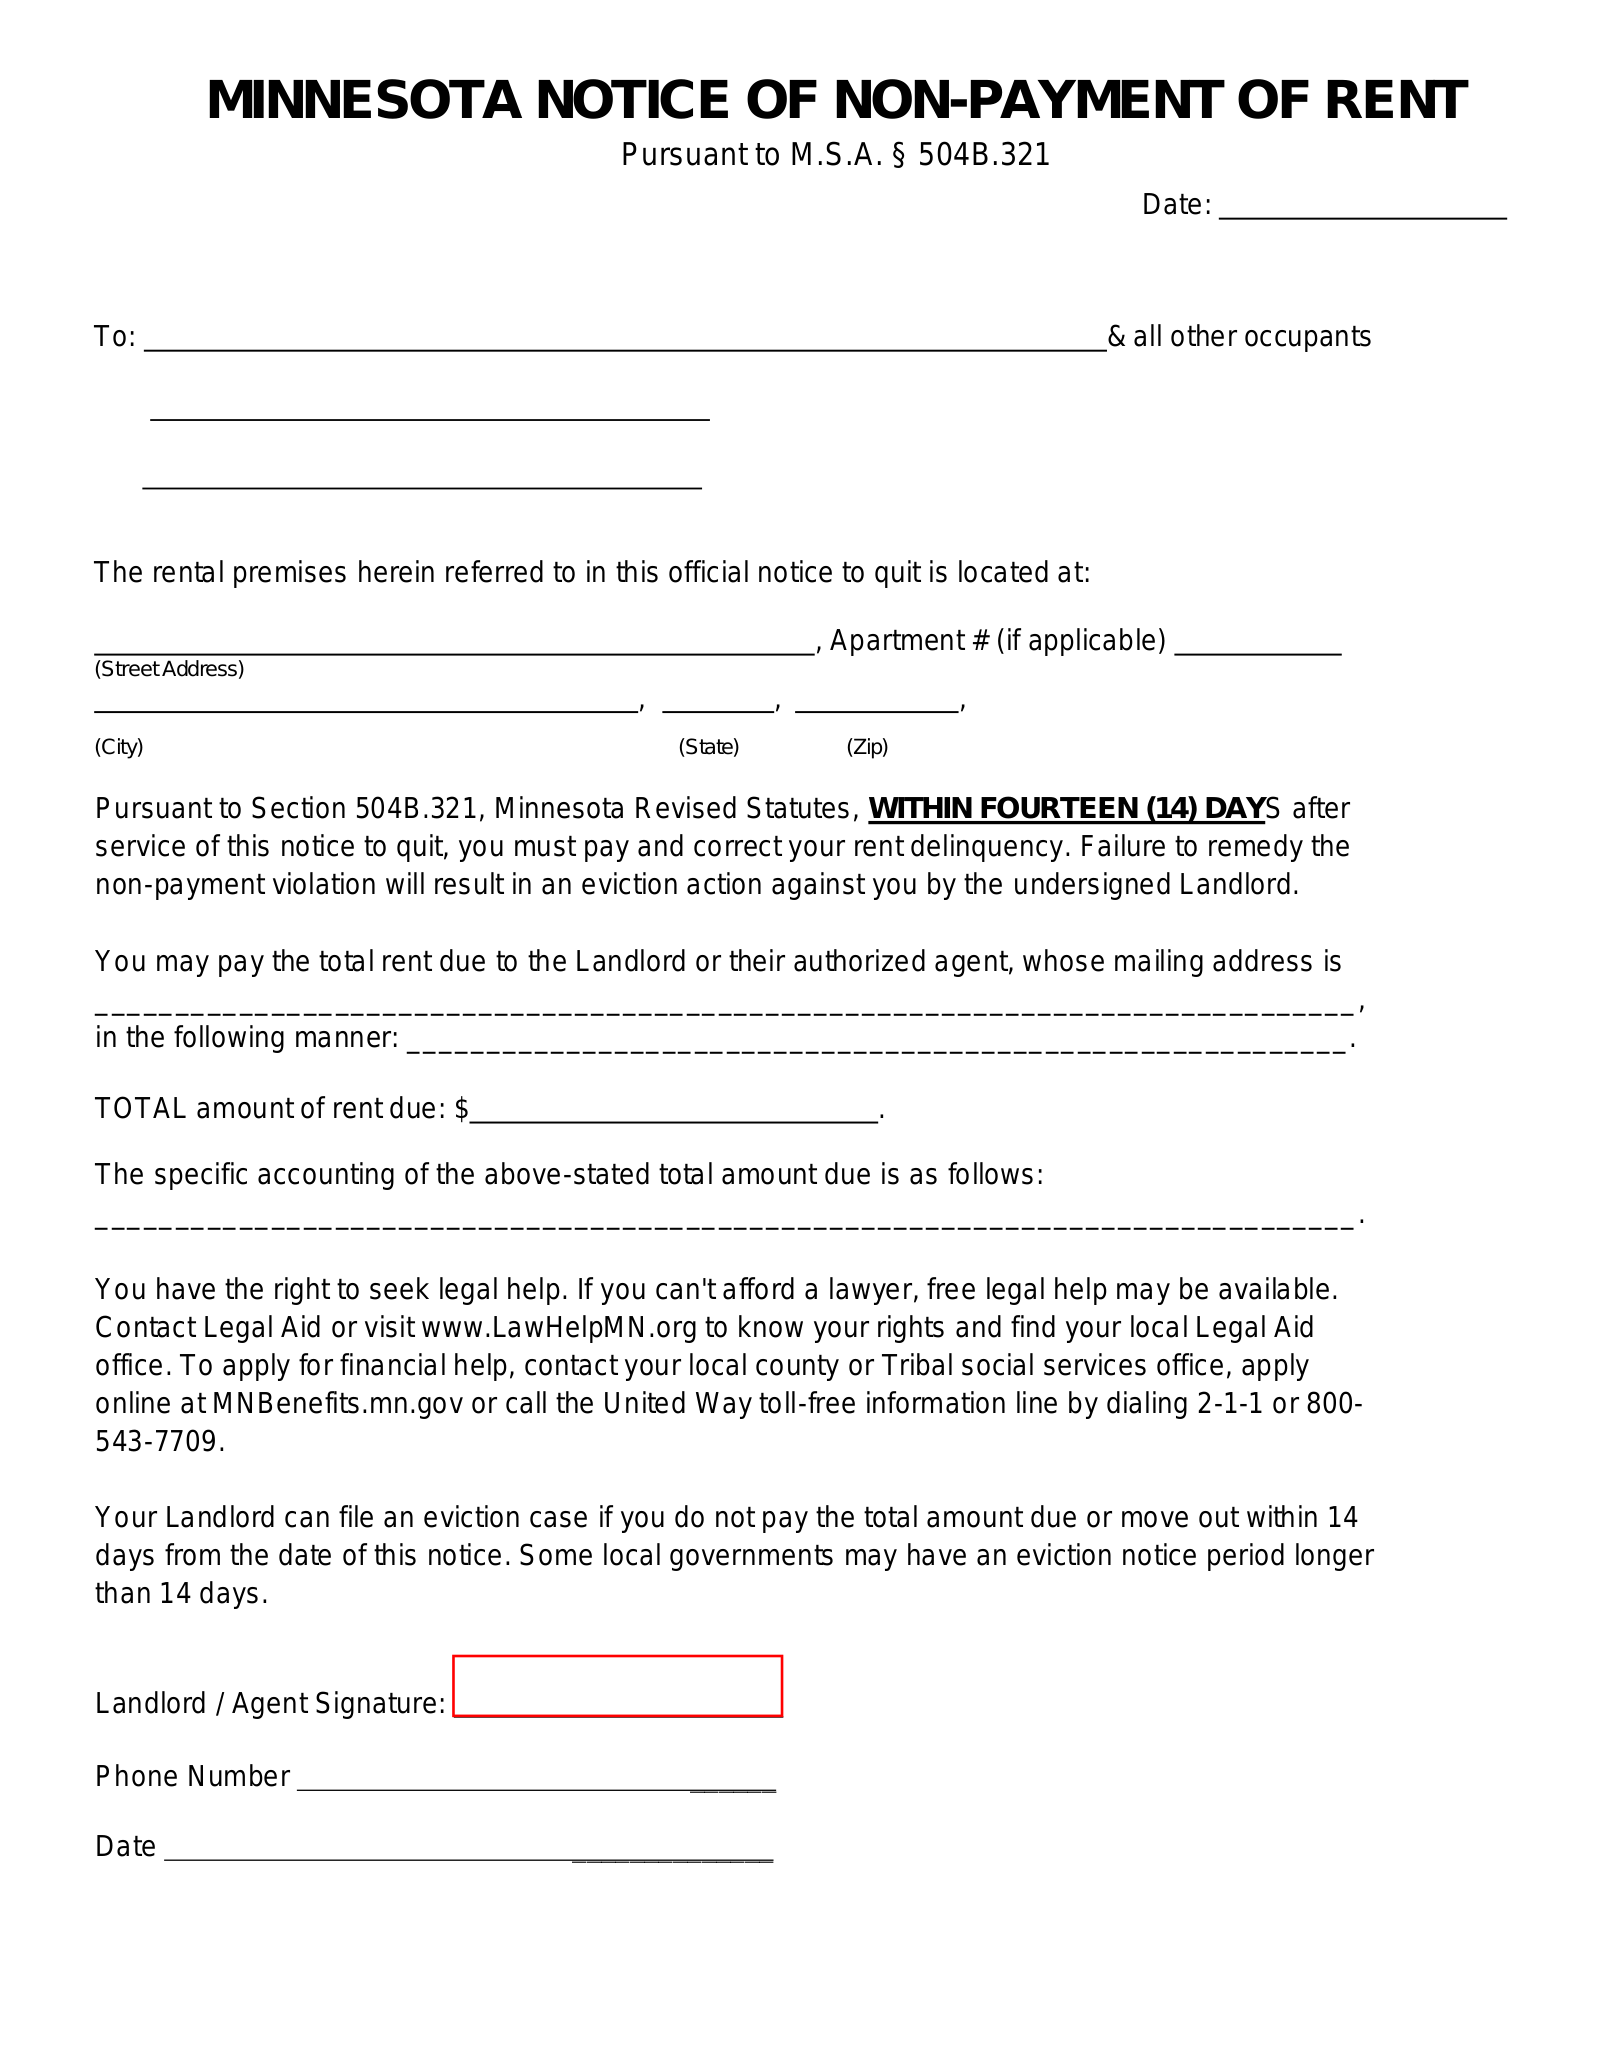 Minnesota 14-Day Notice to Quit Form | Non-Payment of Rent